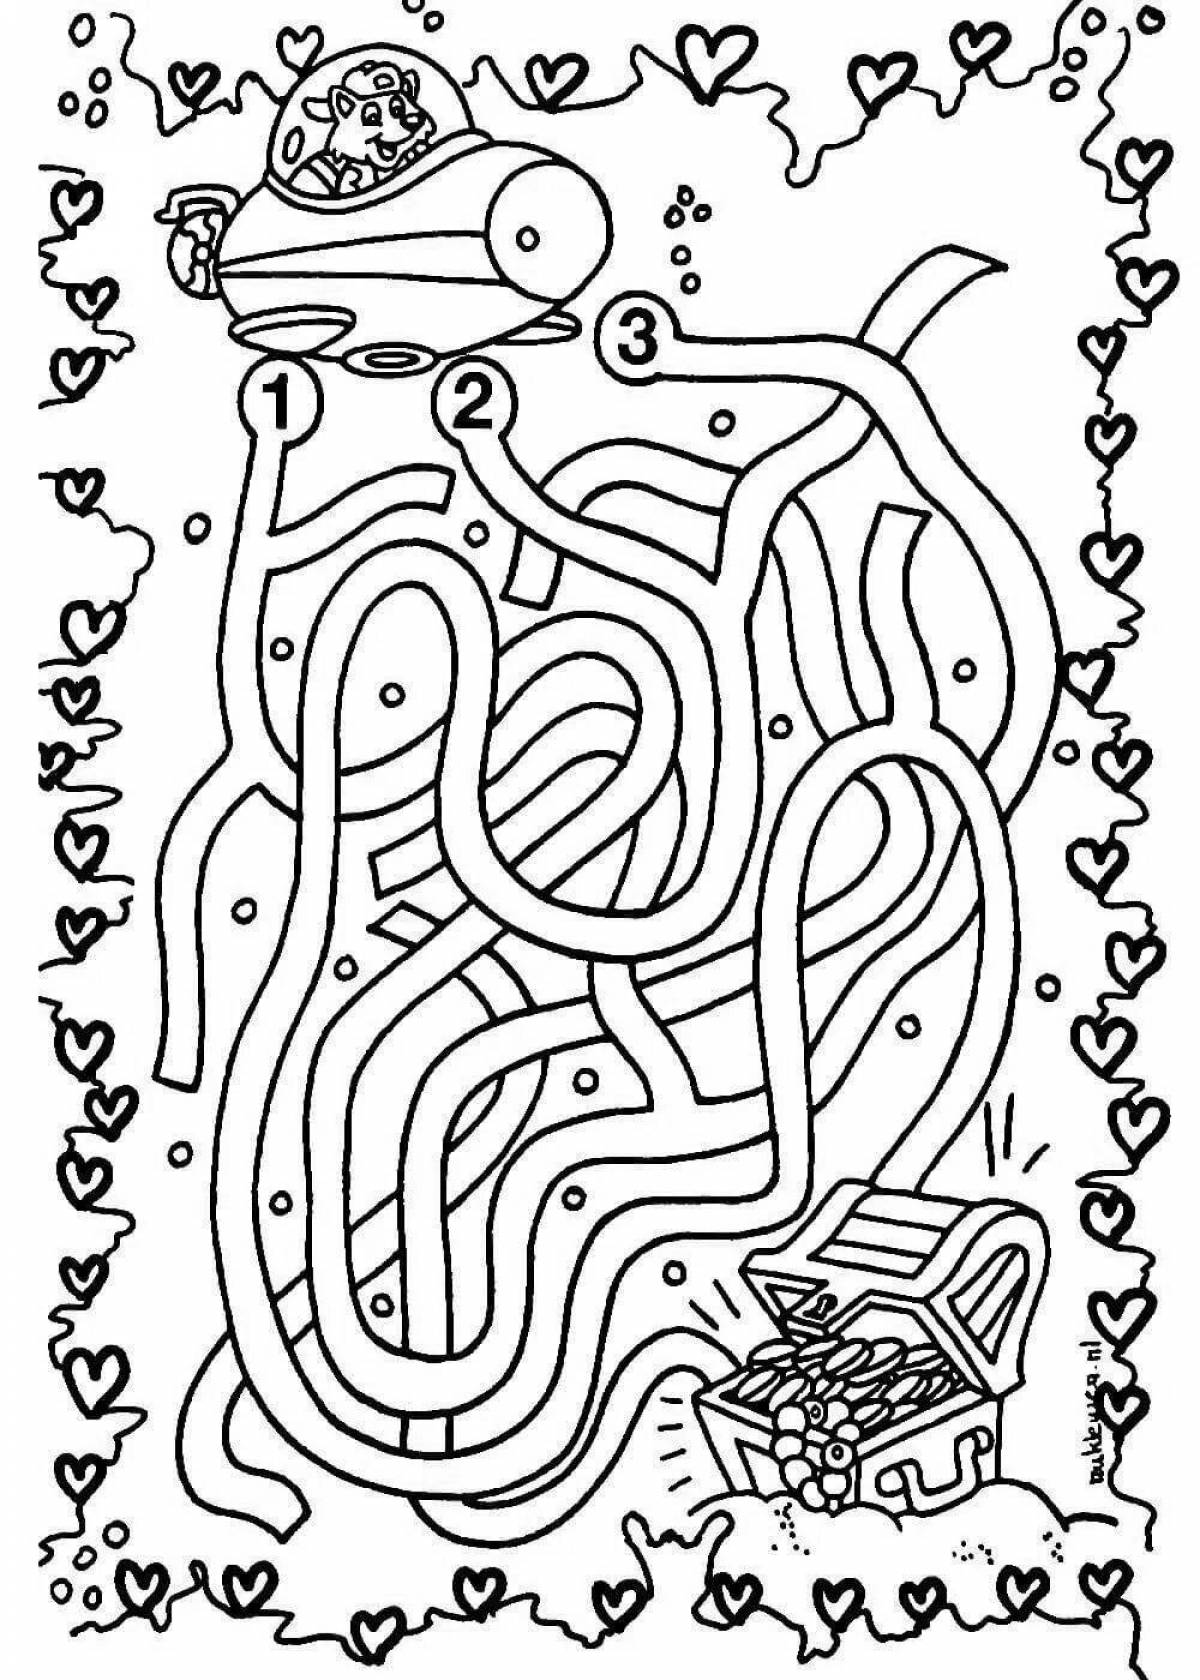 Mazes for children 9 10 years old #4